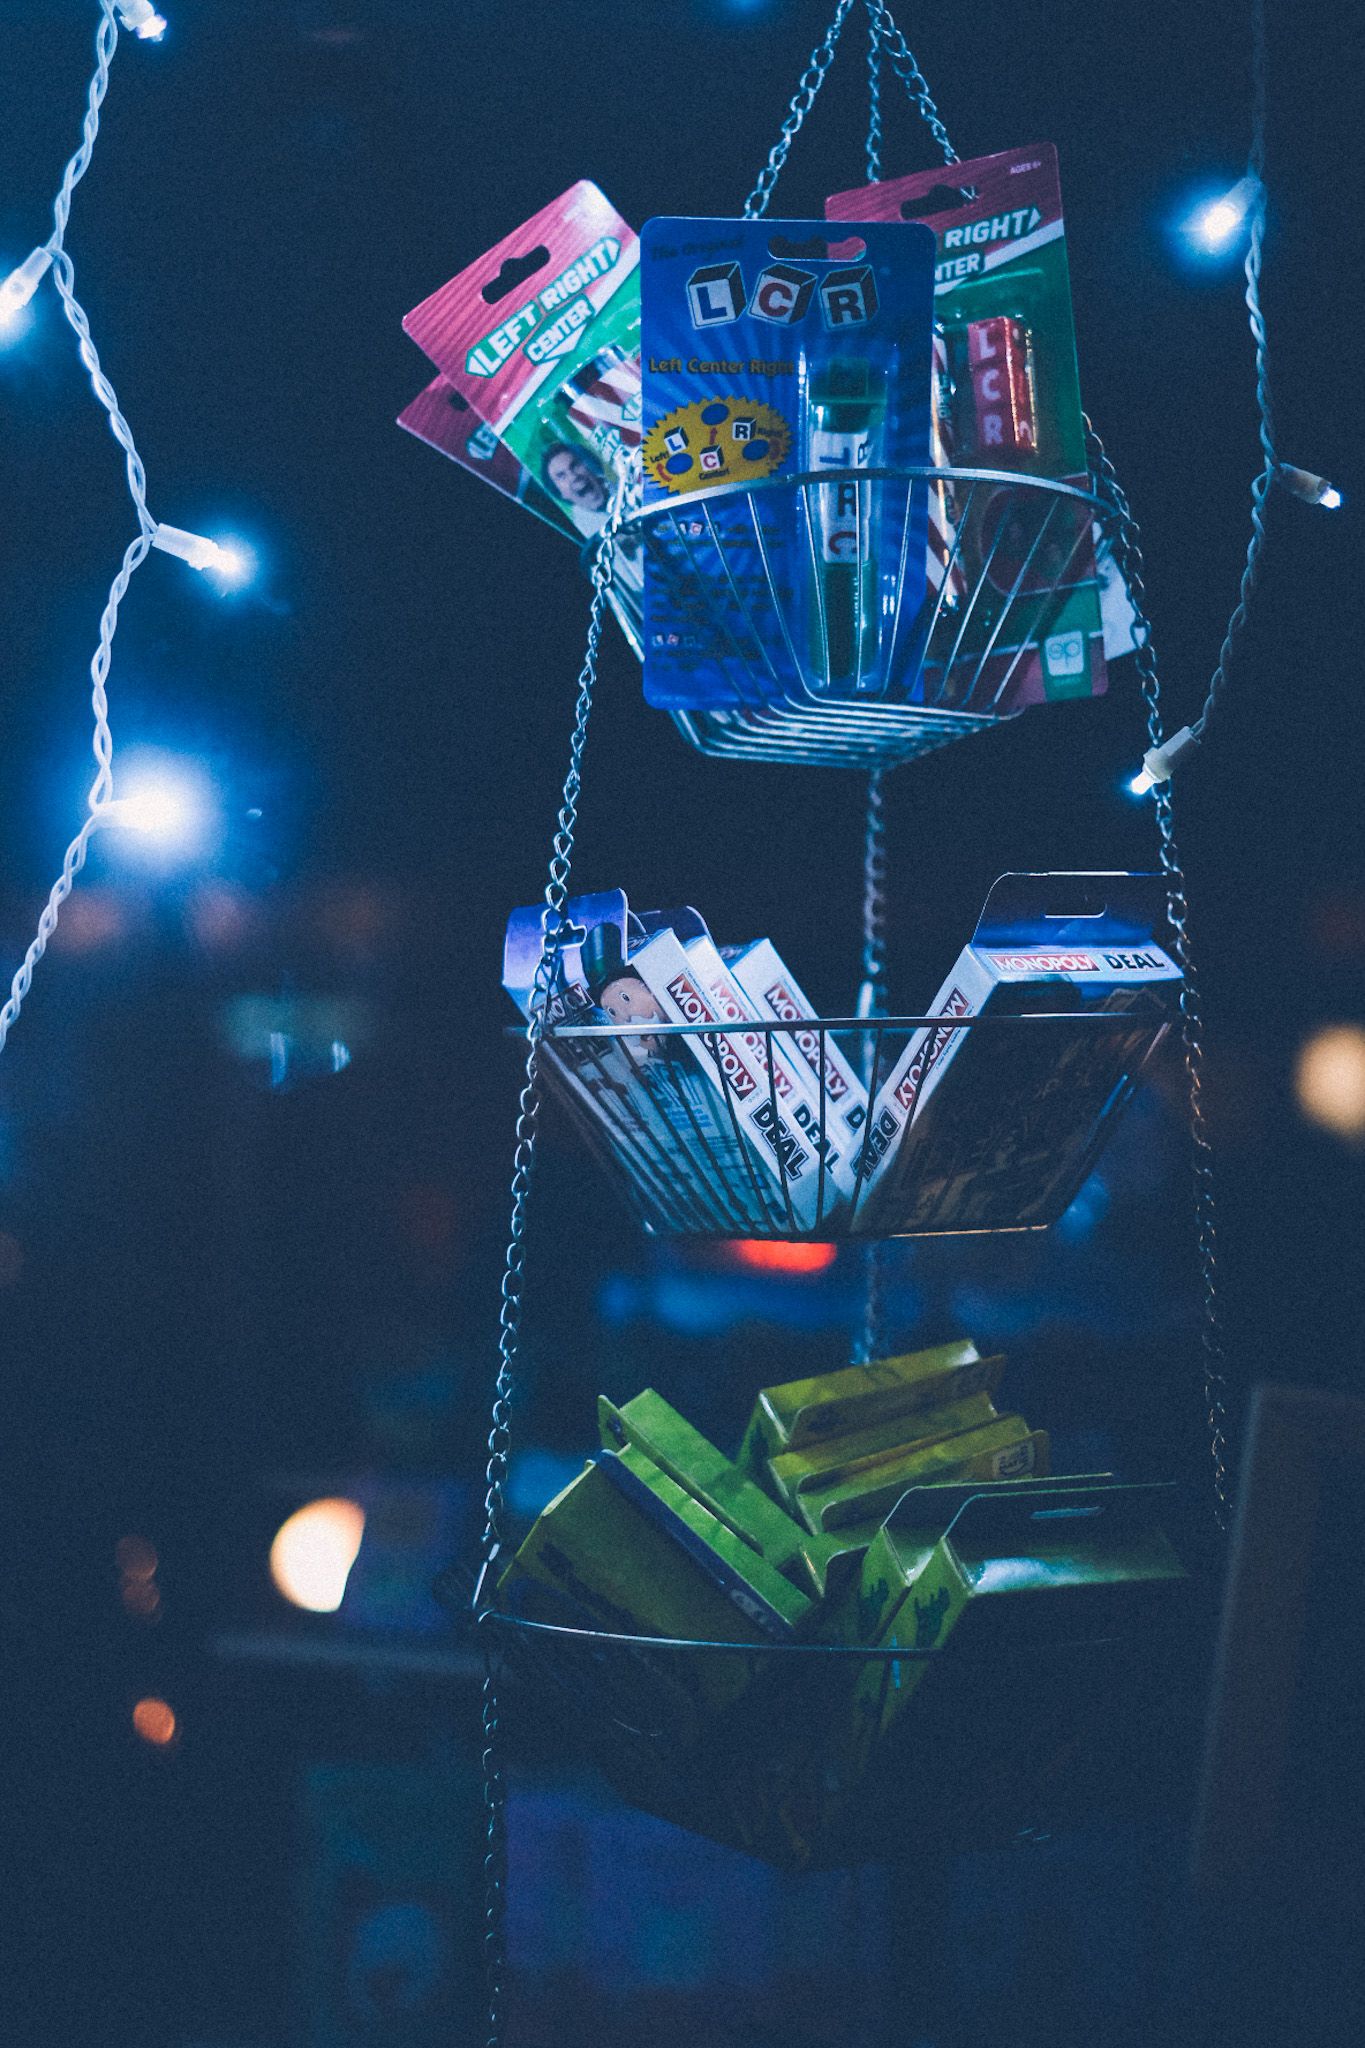 From inside the window of a game store at night, decks of card games hang in a three-tiered basket. Everything is bathed in blue light emanating from the strand of lights lining the windowsill.